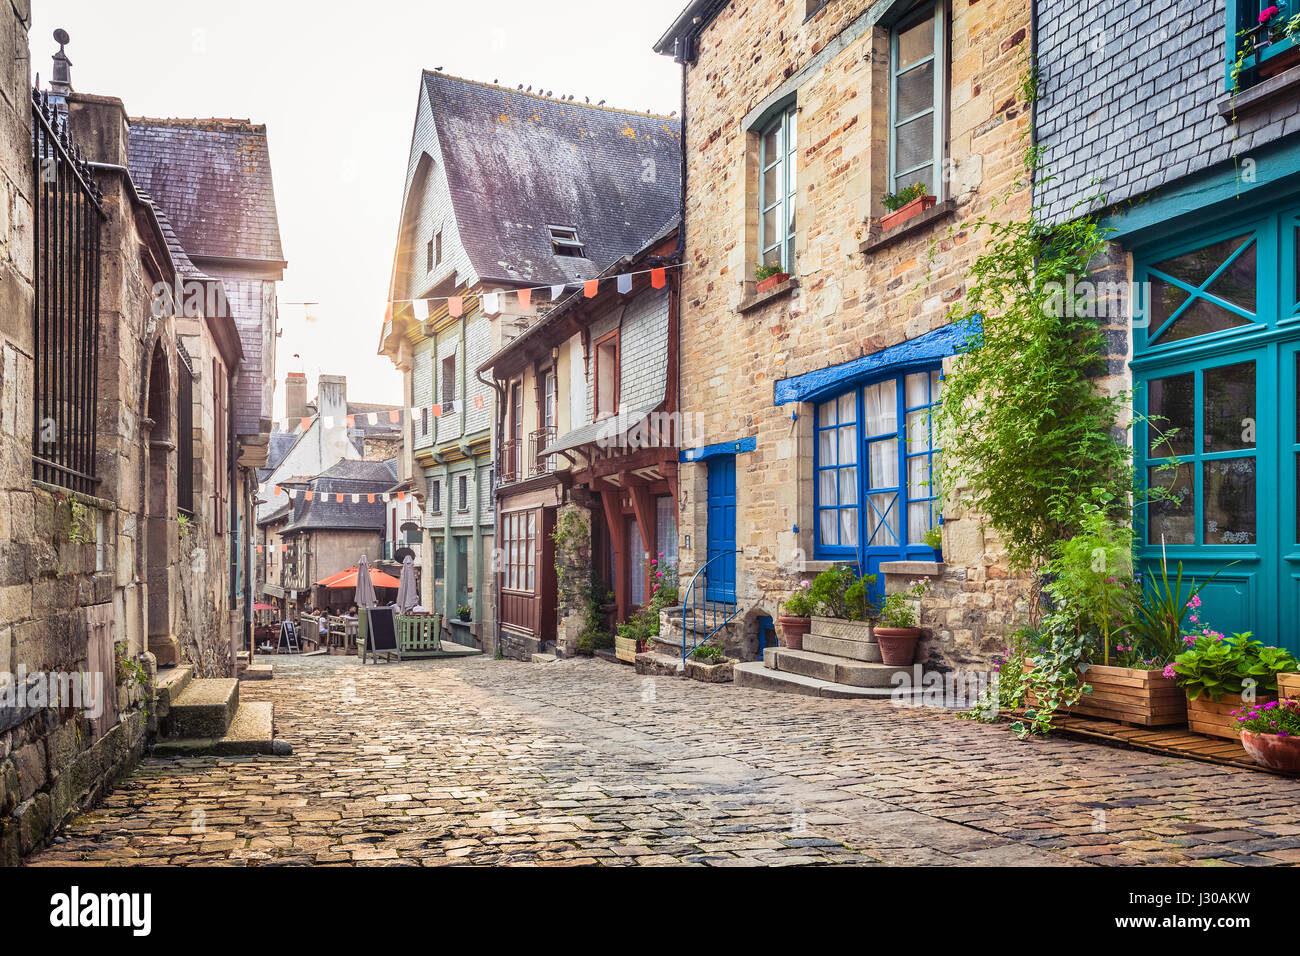 Panoramic view of a charming street scene in an old town in Europe in beautiful evening light at sunset with retro vintage Instagram style filter Stock Photo